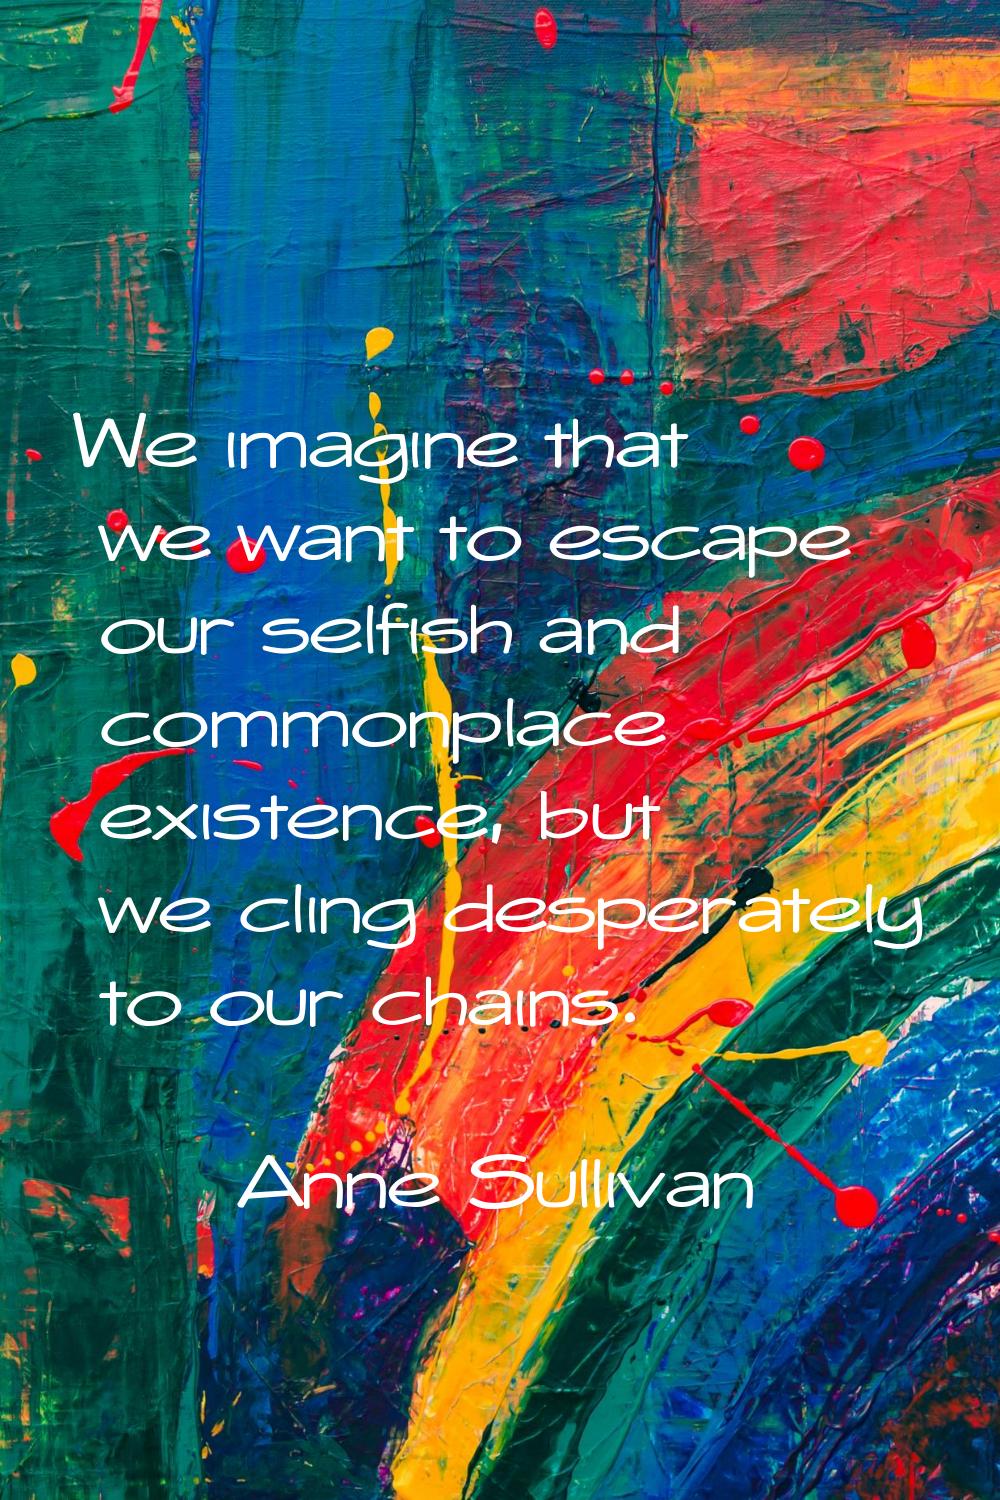 We imagine that we want to escape our selfish and commonplace existence, but we cling desperately t